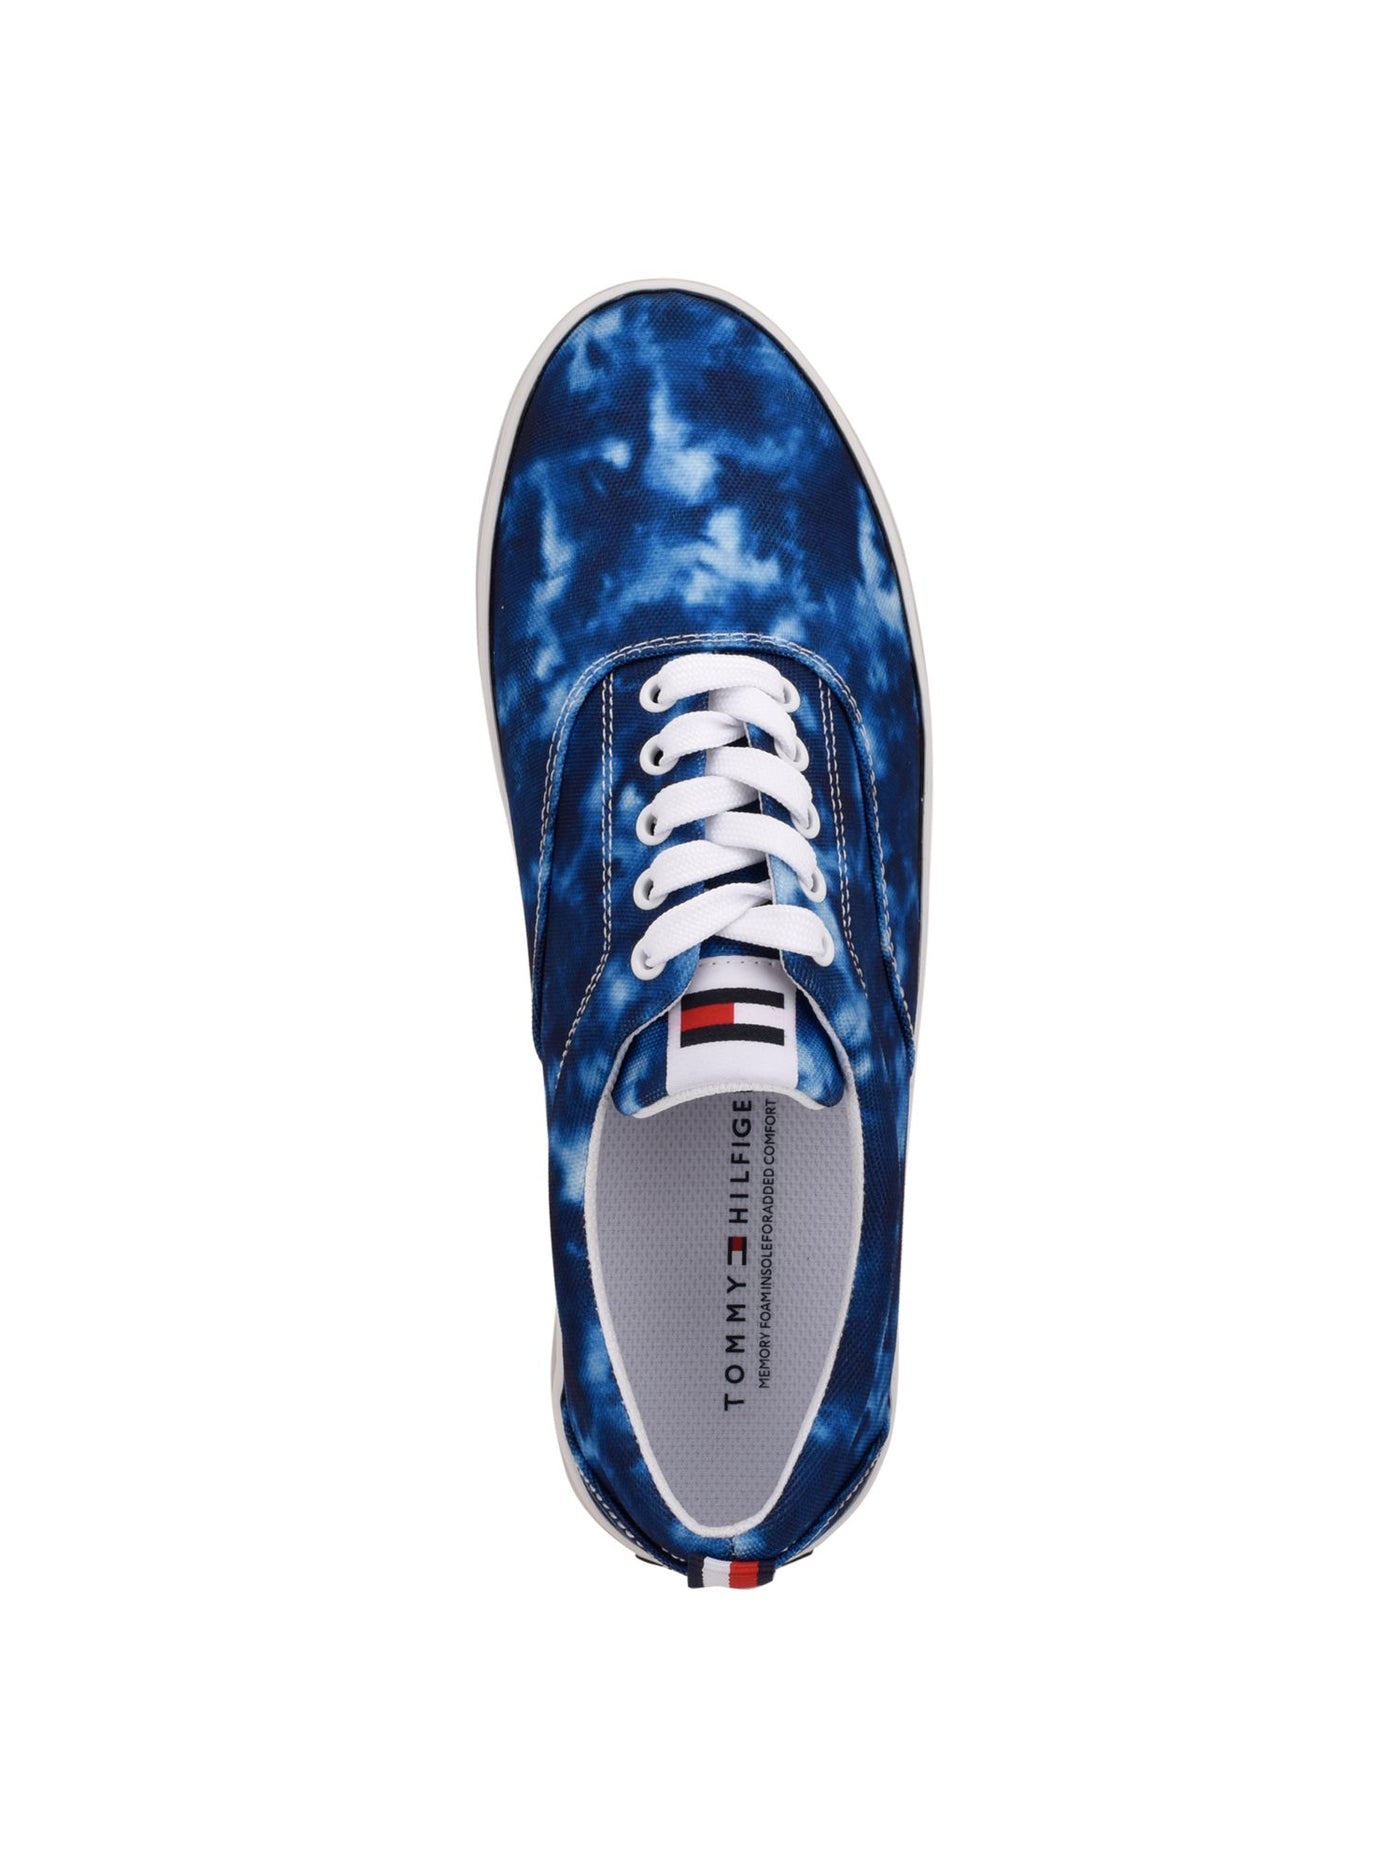 TOMMY HILFIGER Mens Blue Tie Dye Cushioned Comfort Remmo Round Toe Platform Lace-Up Sneakers Shoes 10.5 M